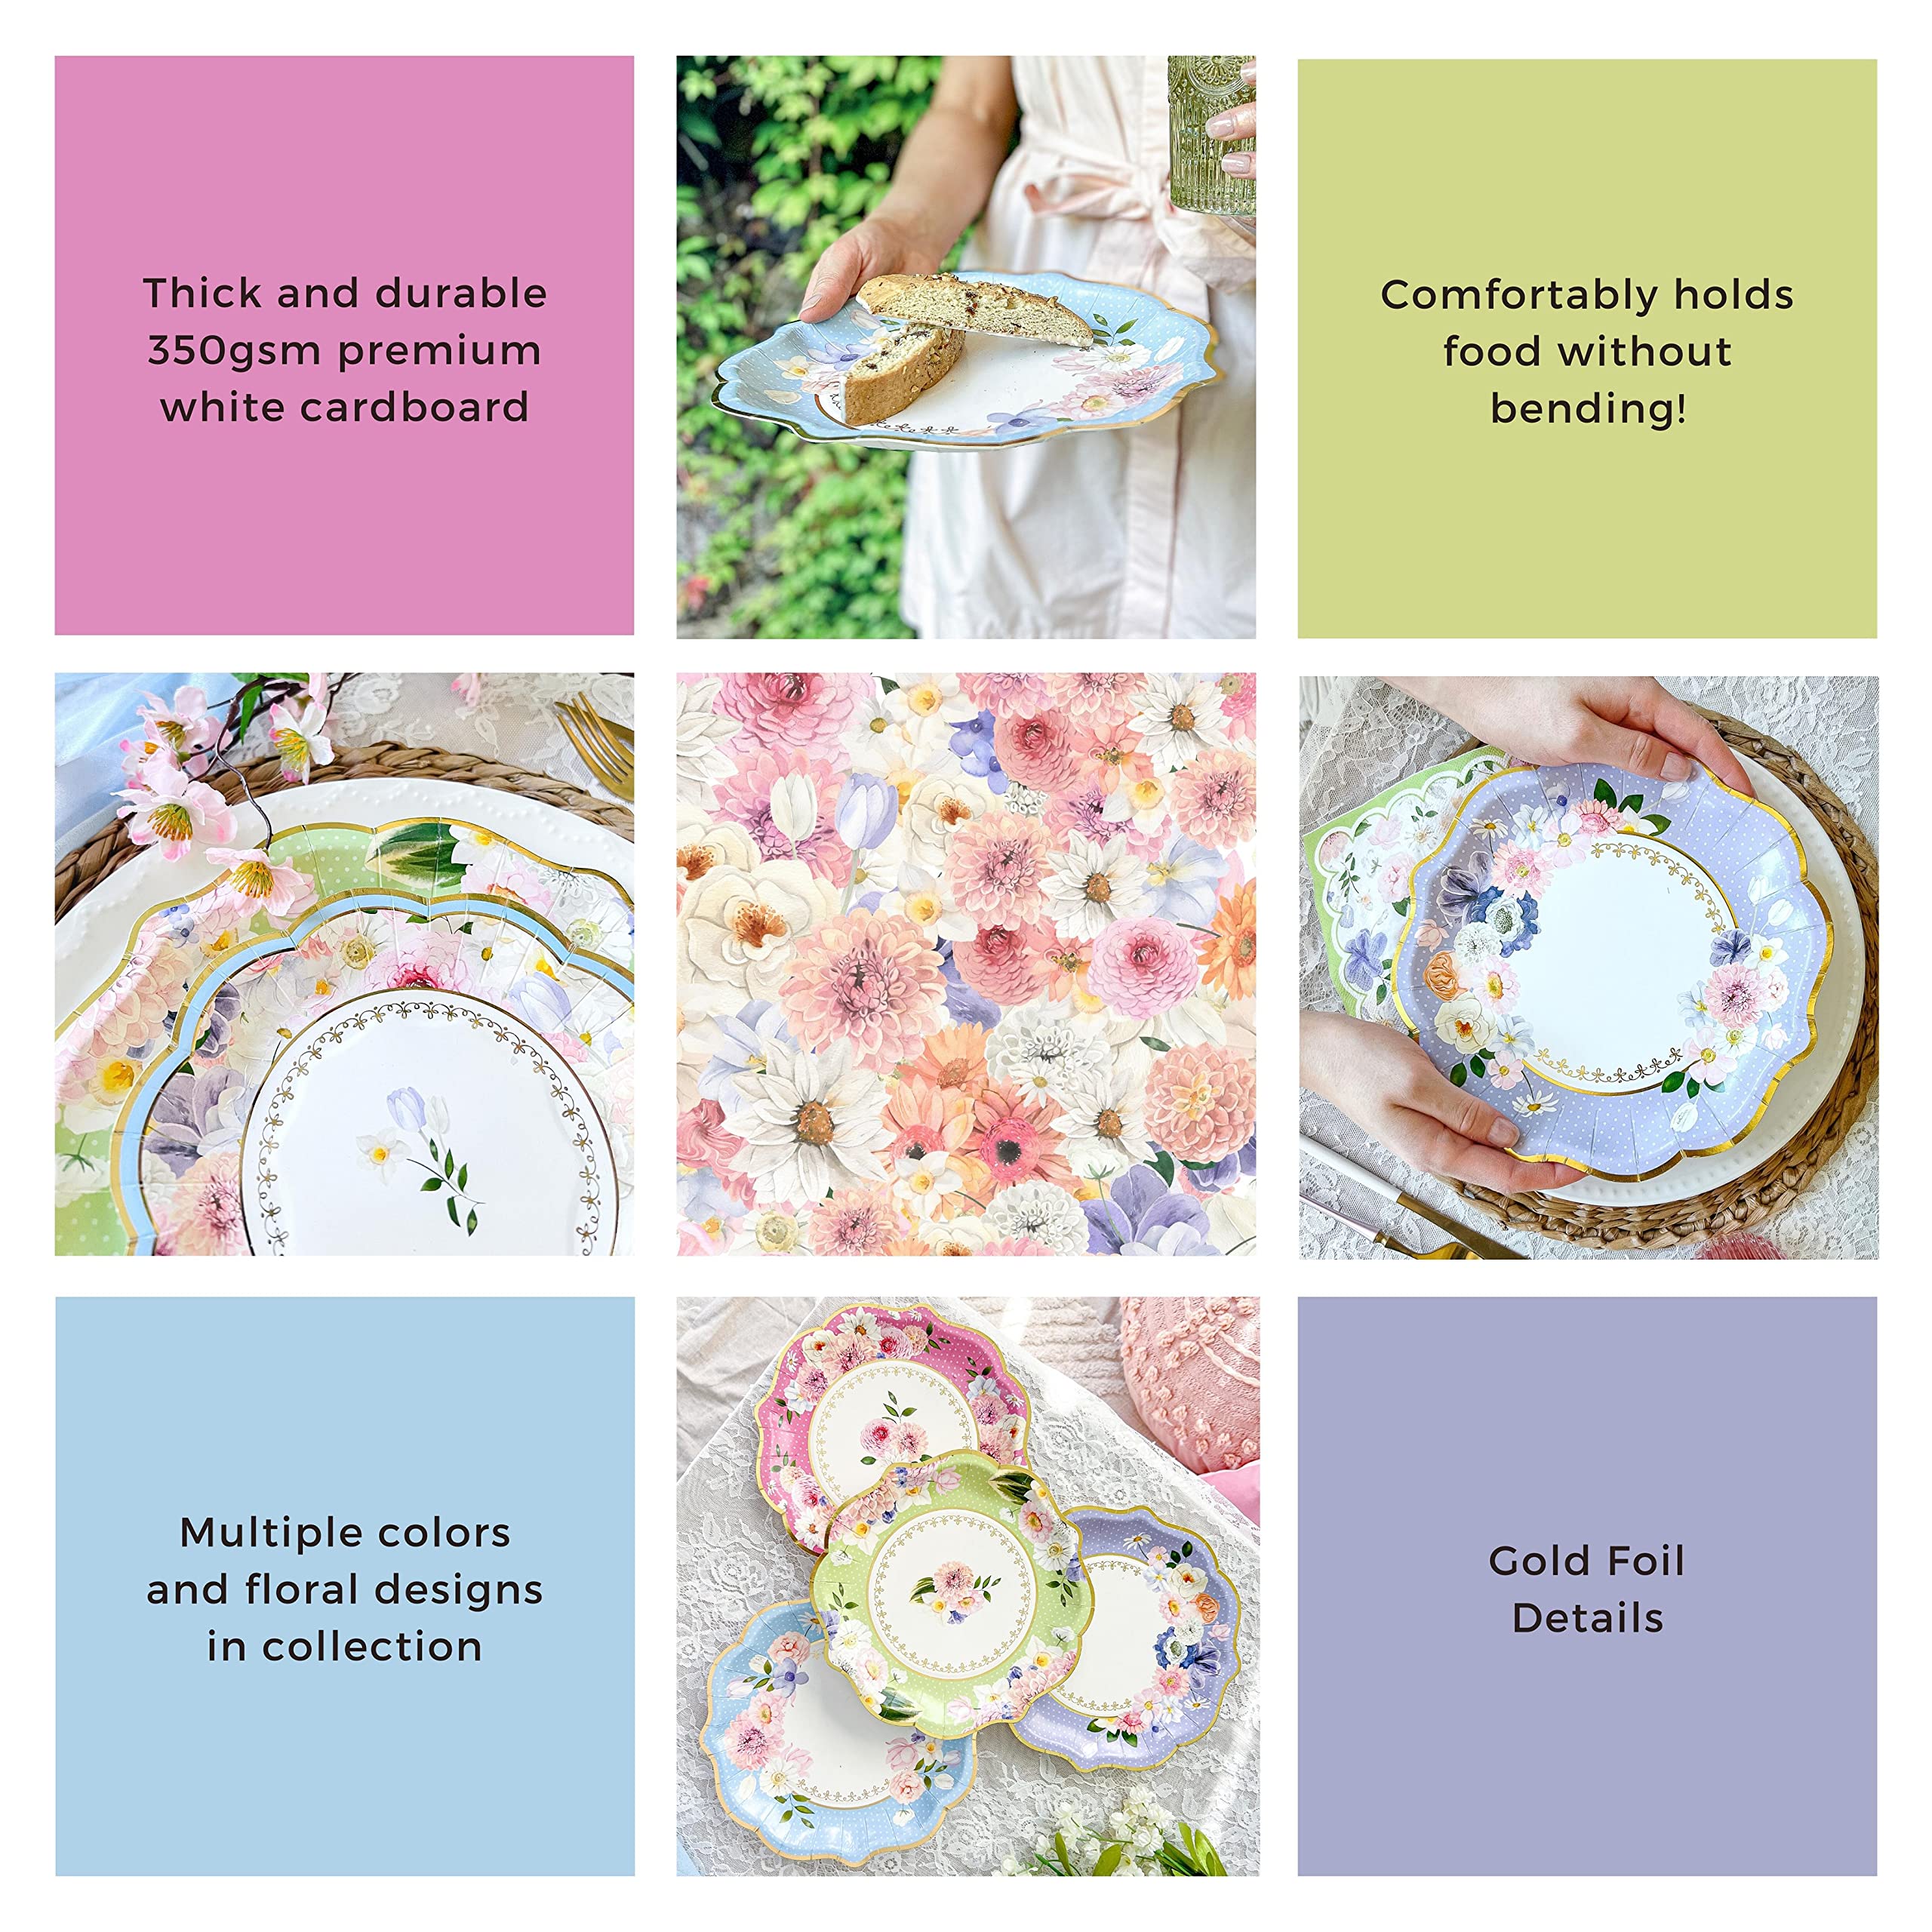 Tea Party Decorations Tableware Set by Kate Aspen (62 Pc, 16 Guests), Colorful Pastel Party Supplies for Bridal Showers, Baby Shower, Garden Party, Birthdays